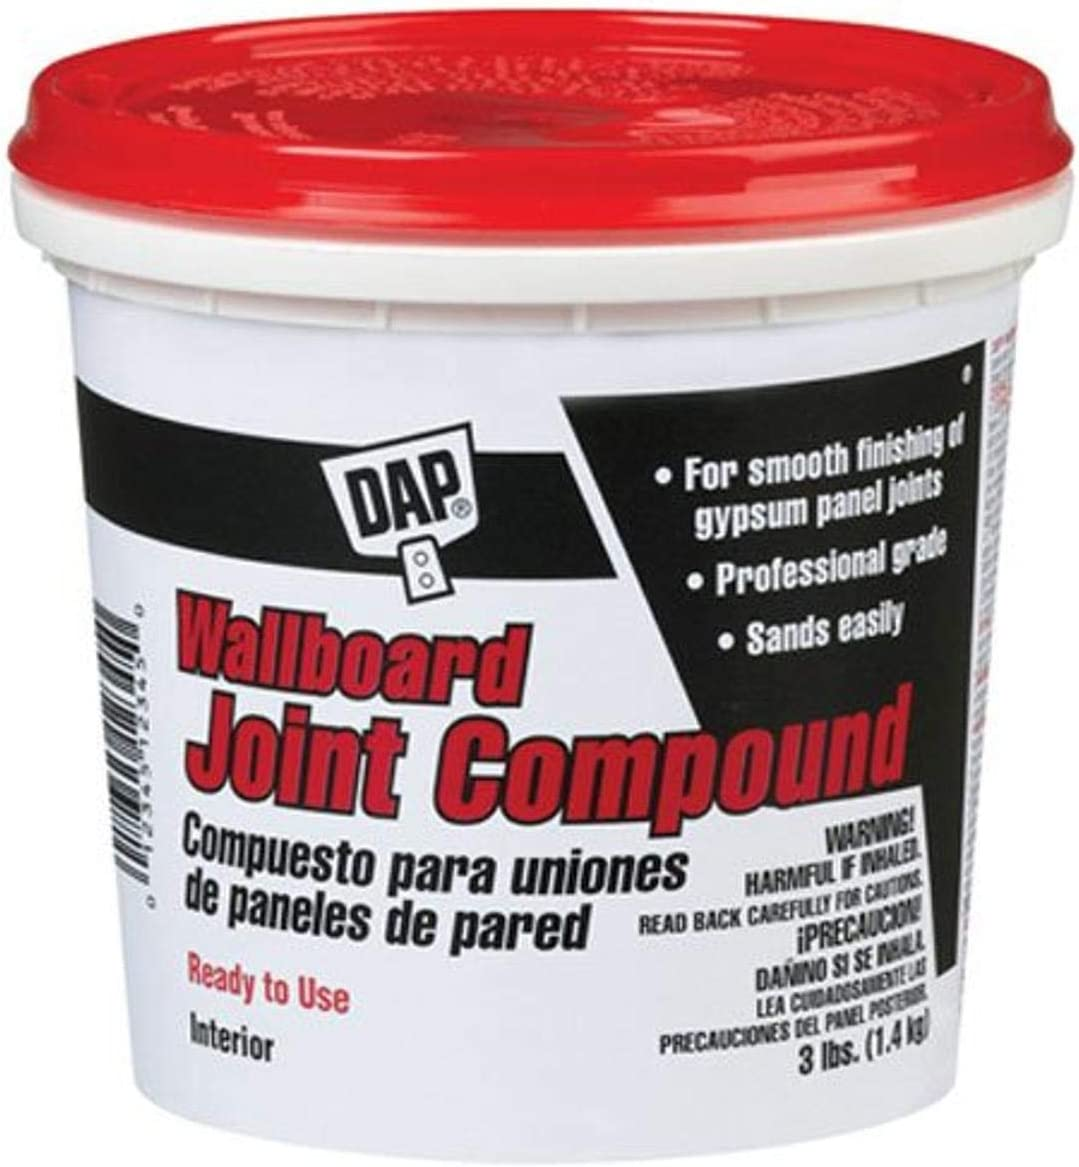 DAP's Wallboard Joint Compound